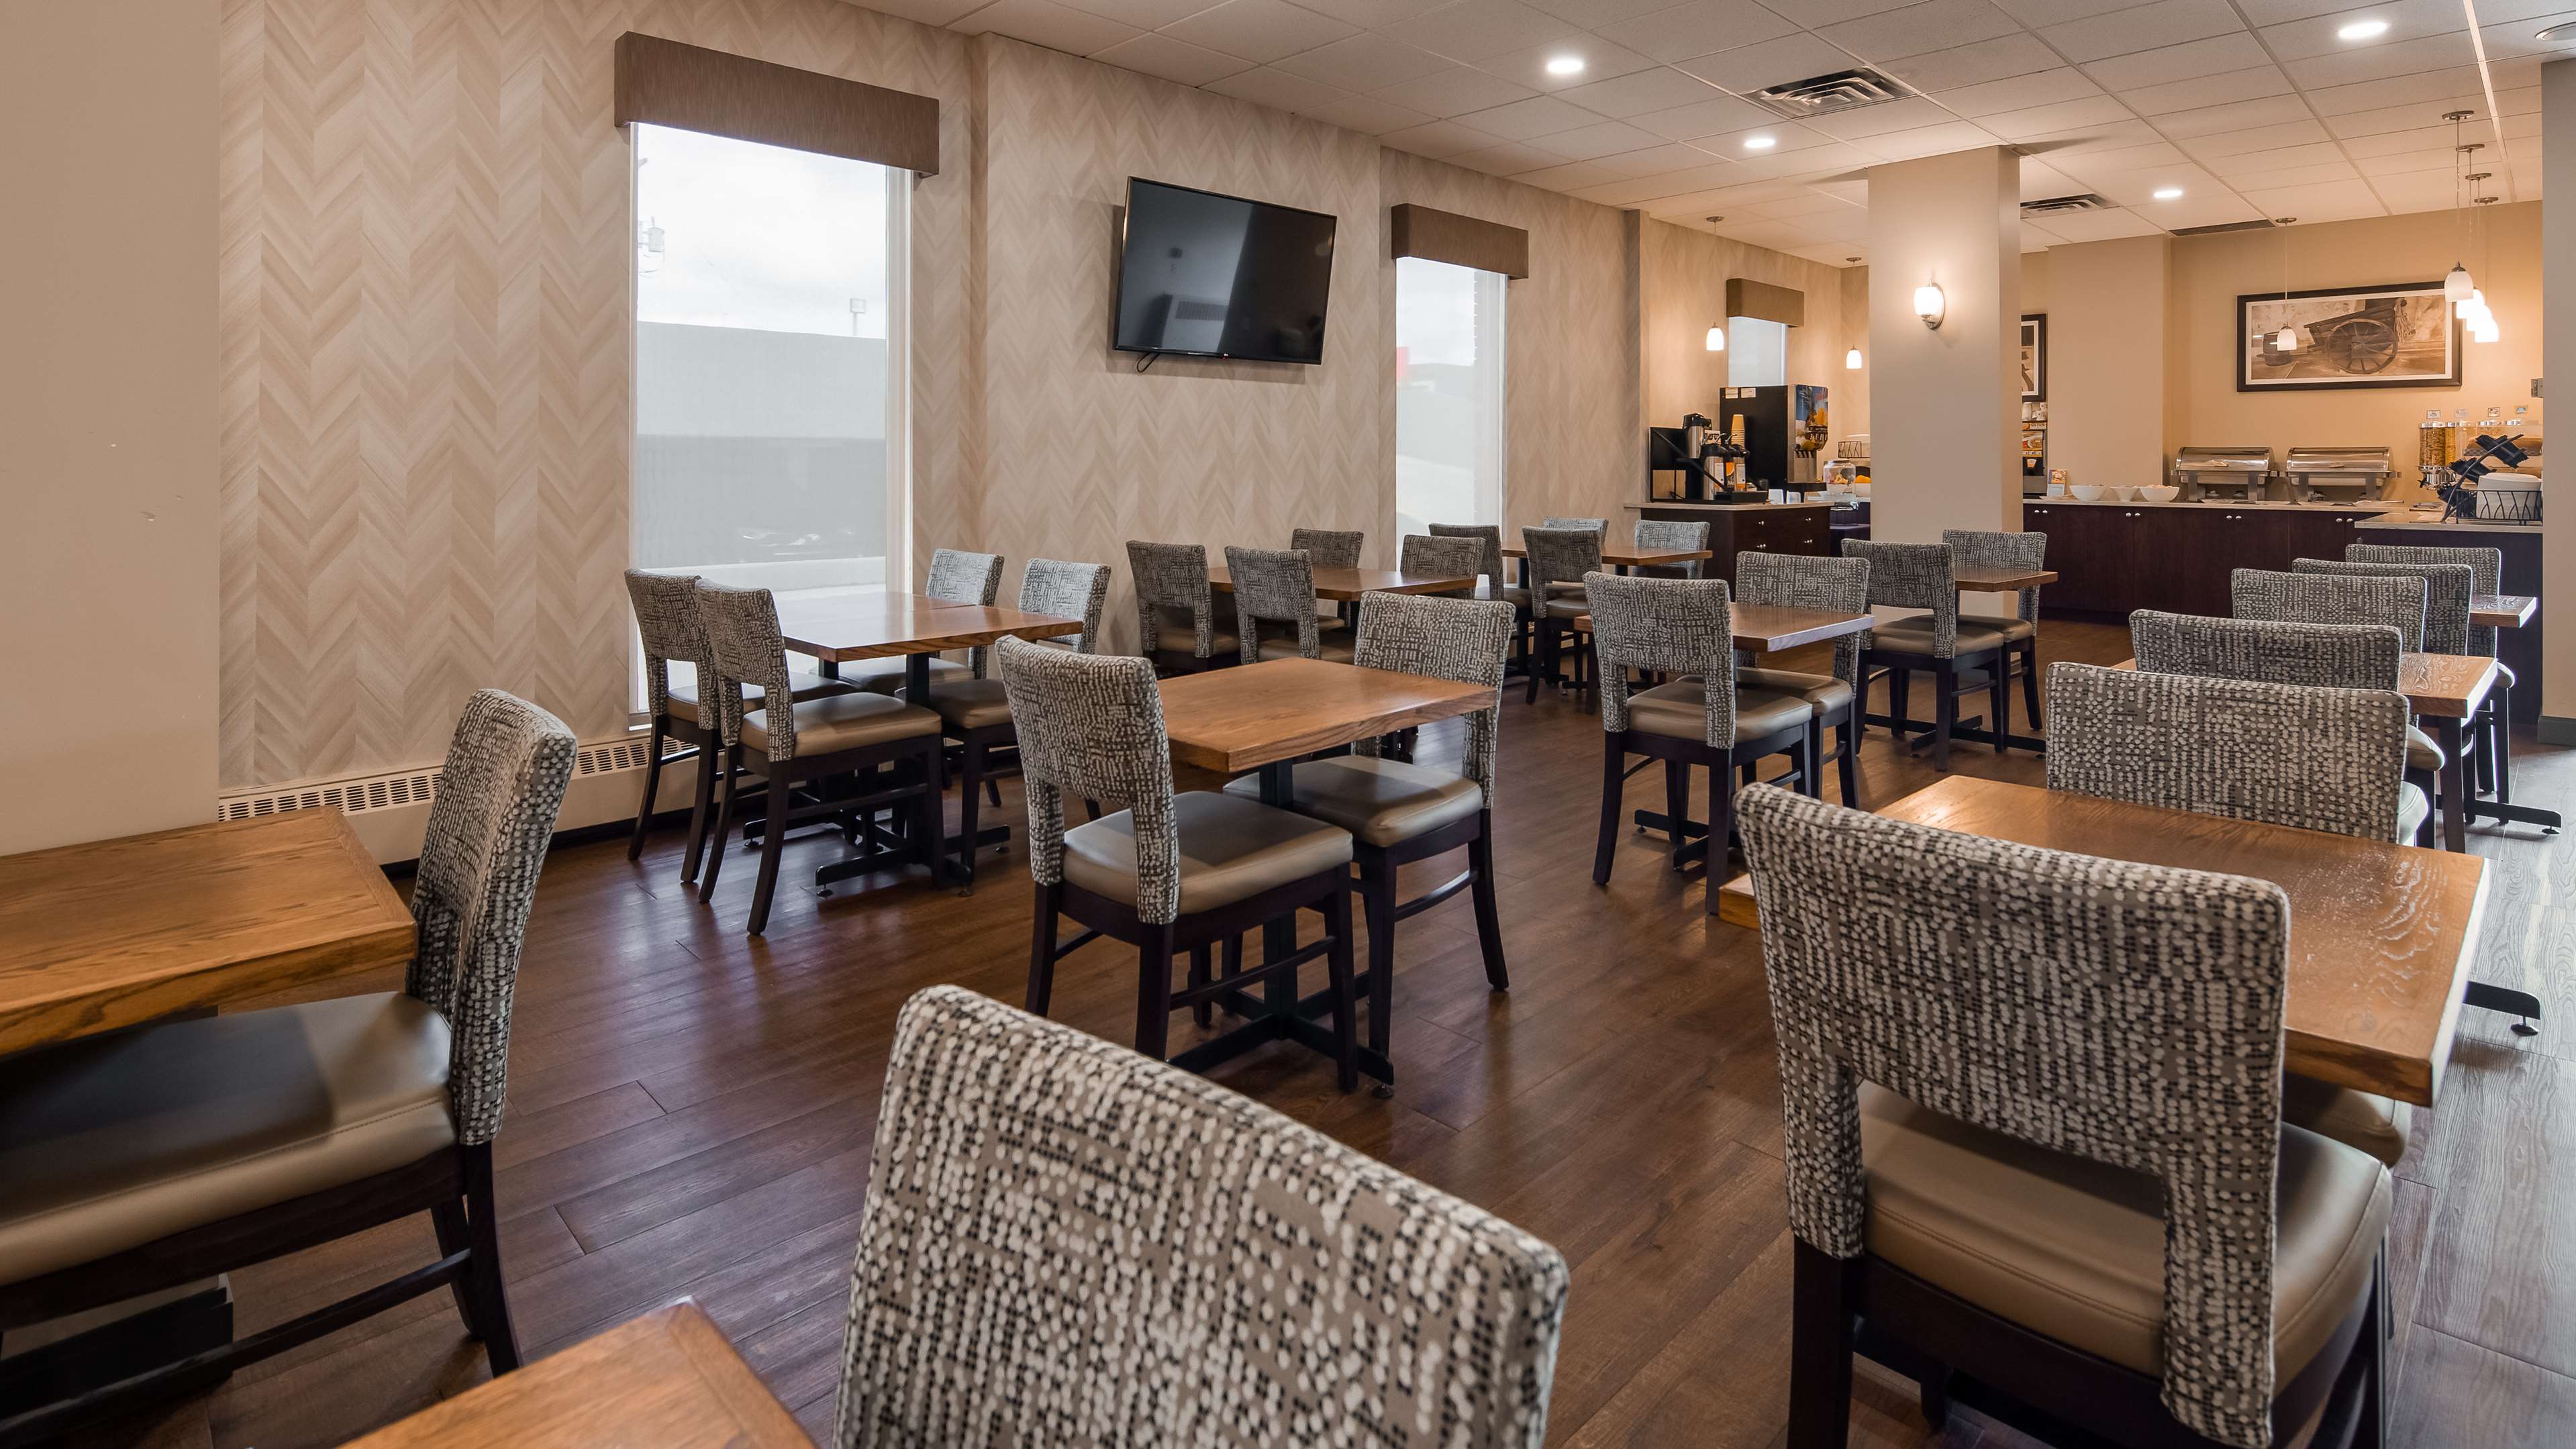 Best Western Airdrie in Airdrie: Breakfast Area seating for families, teams, or casual breakfast between friends.